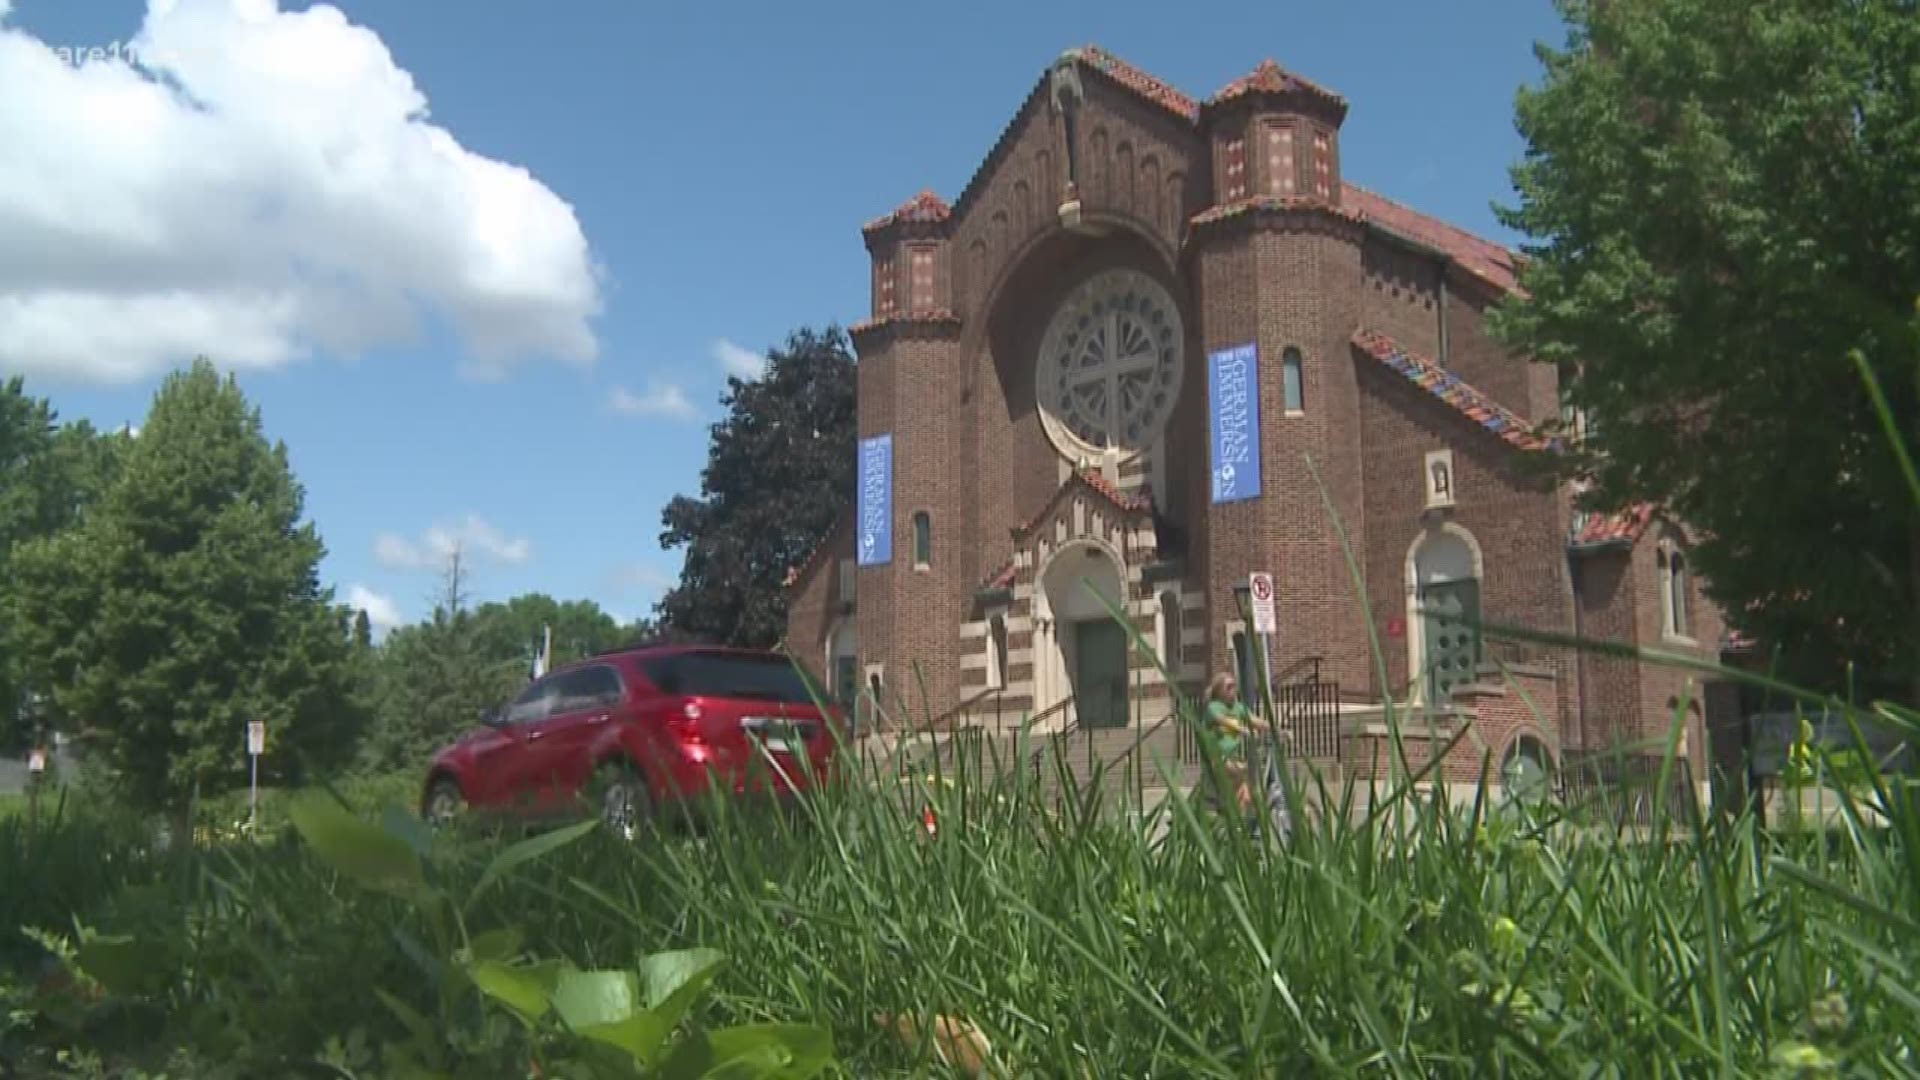 Another step today in the back-and-forth going on  about whether or not to tear down this 92-year-old church in St. Paul.